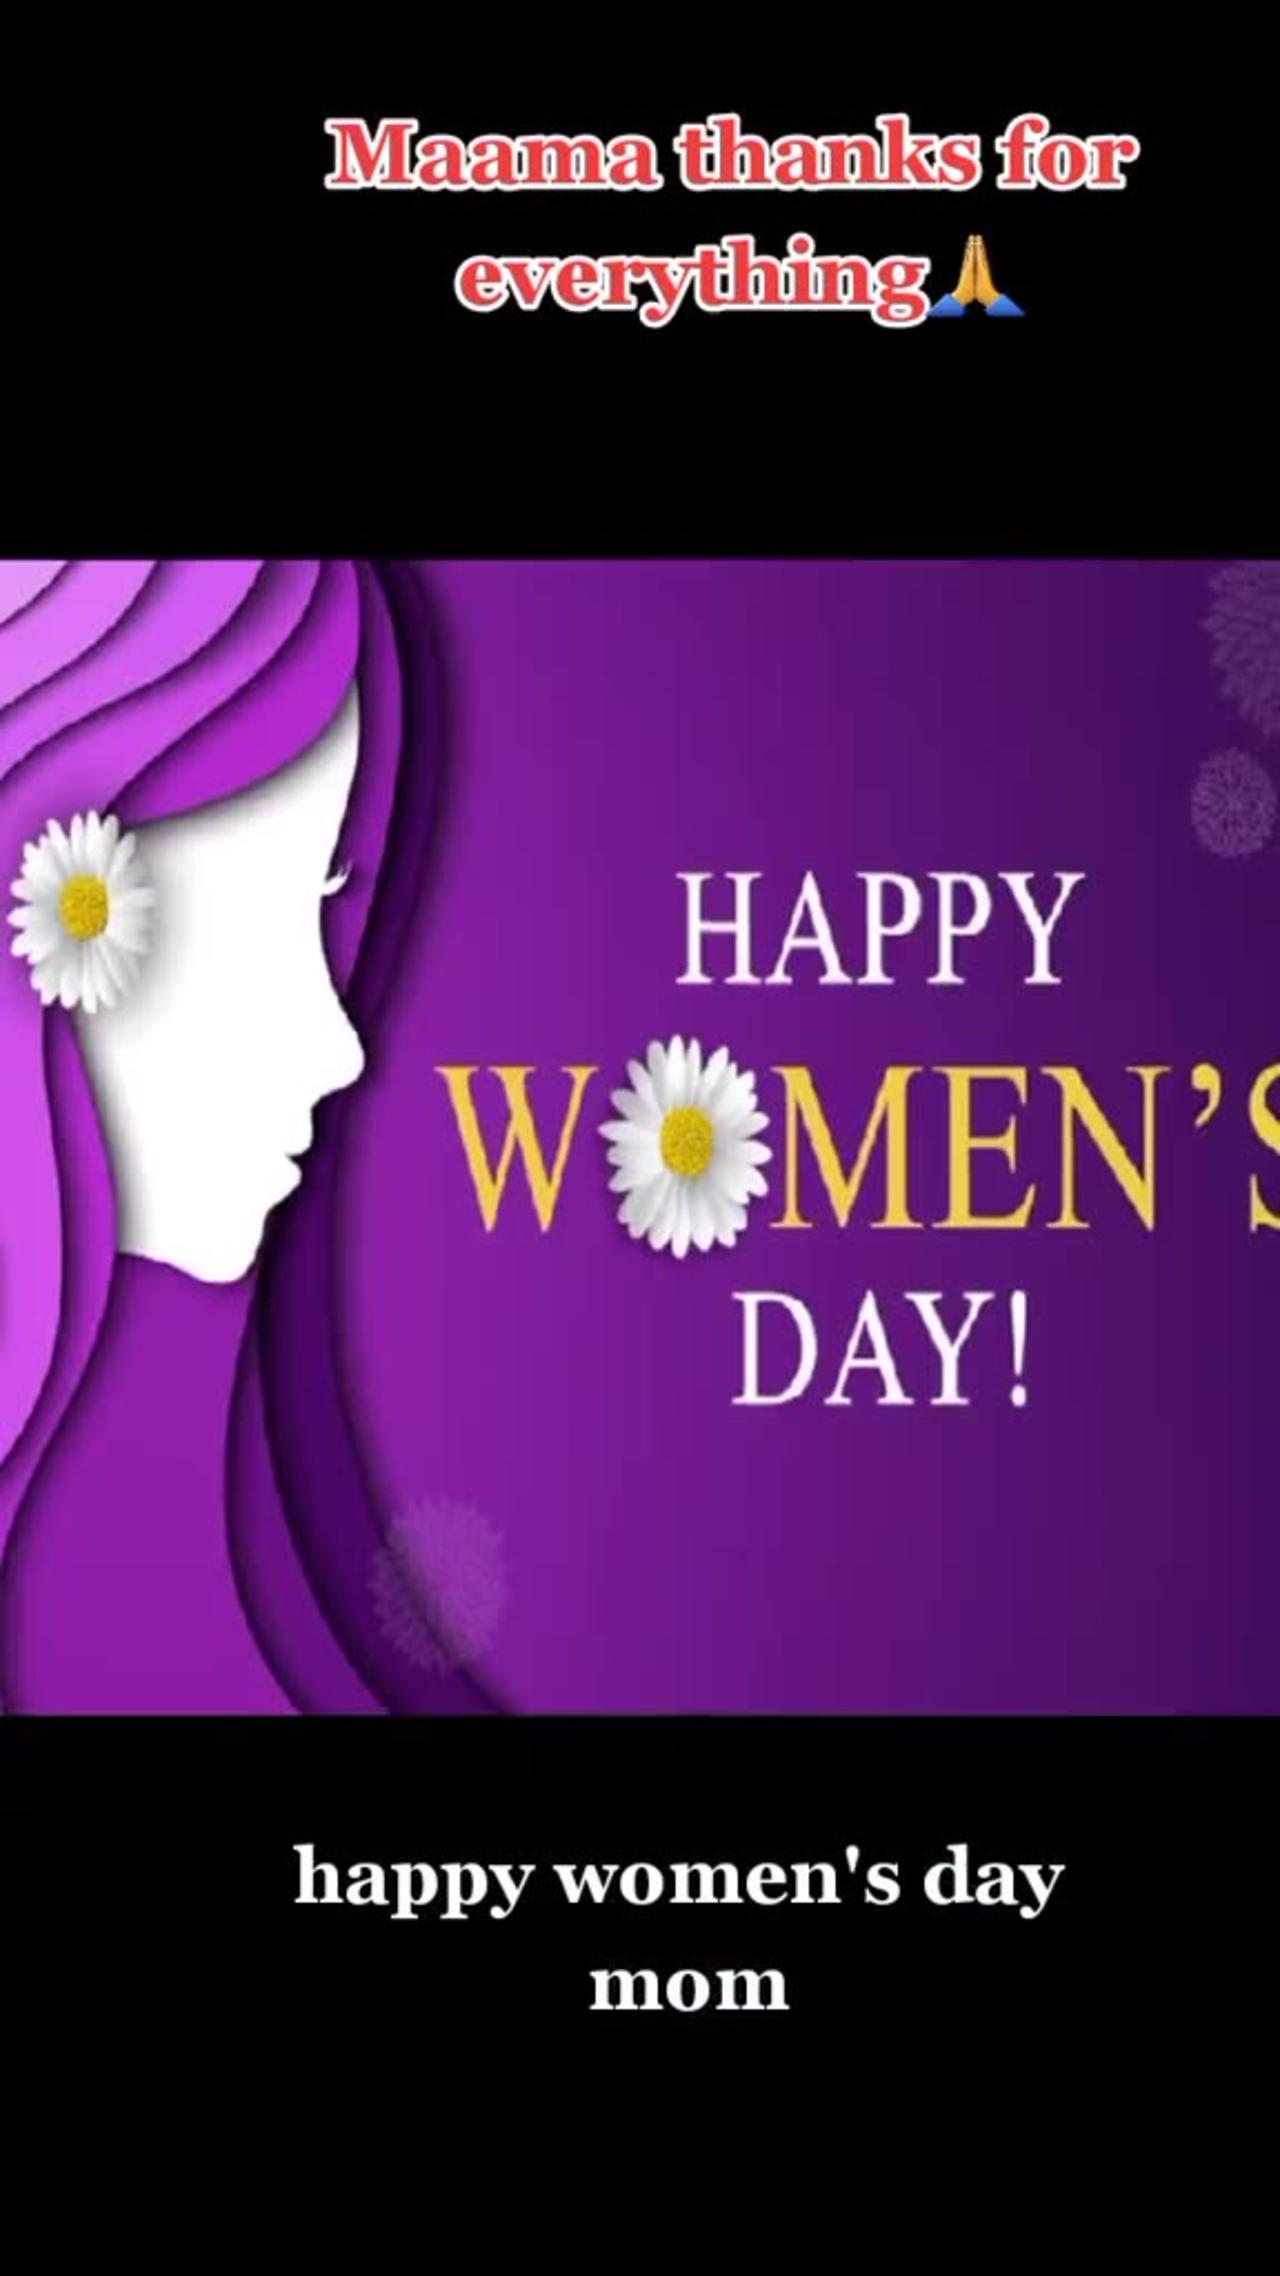 Happy International Women's Day to all the inspiring women in the world!